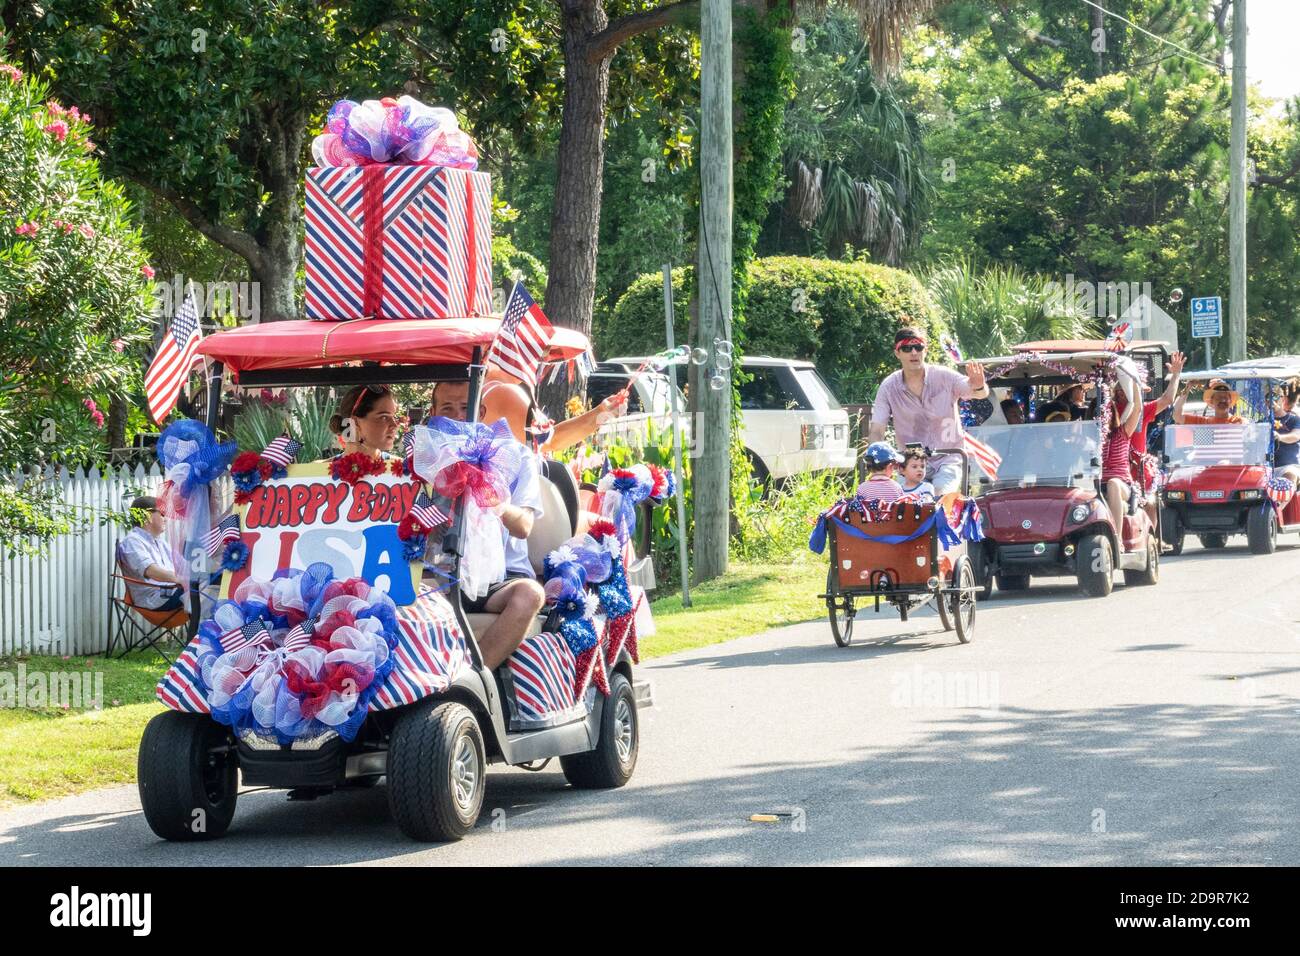 Decorated golf cart floats and bicycles ride down the road during the annual Independence Day parade July 4, 2019 in Sullivan's Island, South Carolina. The tiny affluent Sea Island beach community across from Charleston holds an outsized golf cart parade featuring more than 75 decorated carts. Stock Photo